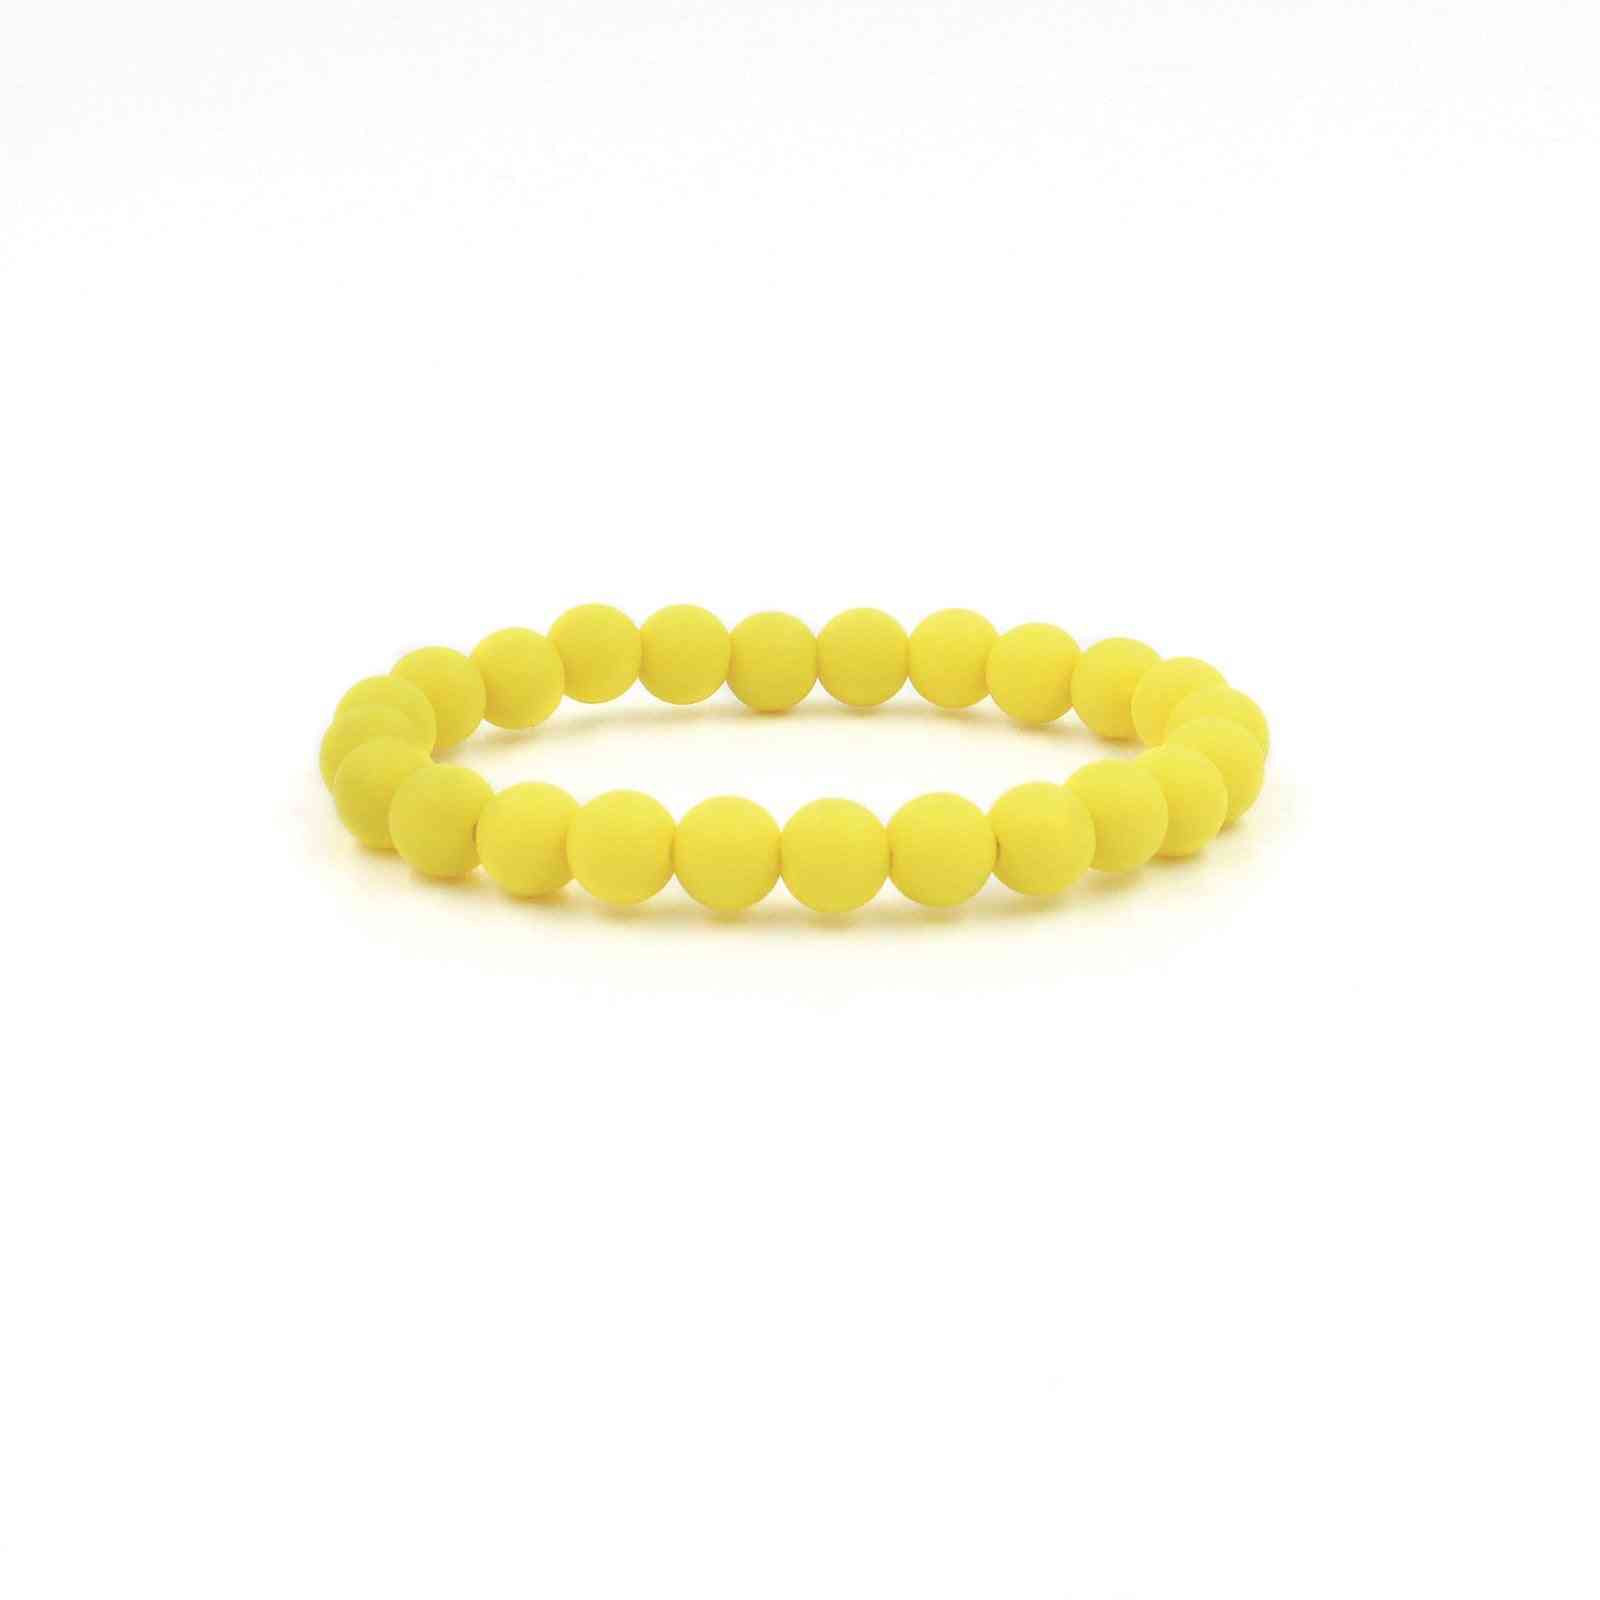 Silicon Rubber 9mm, Yellow Bead Bracelets